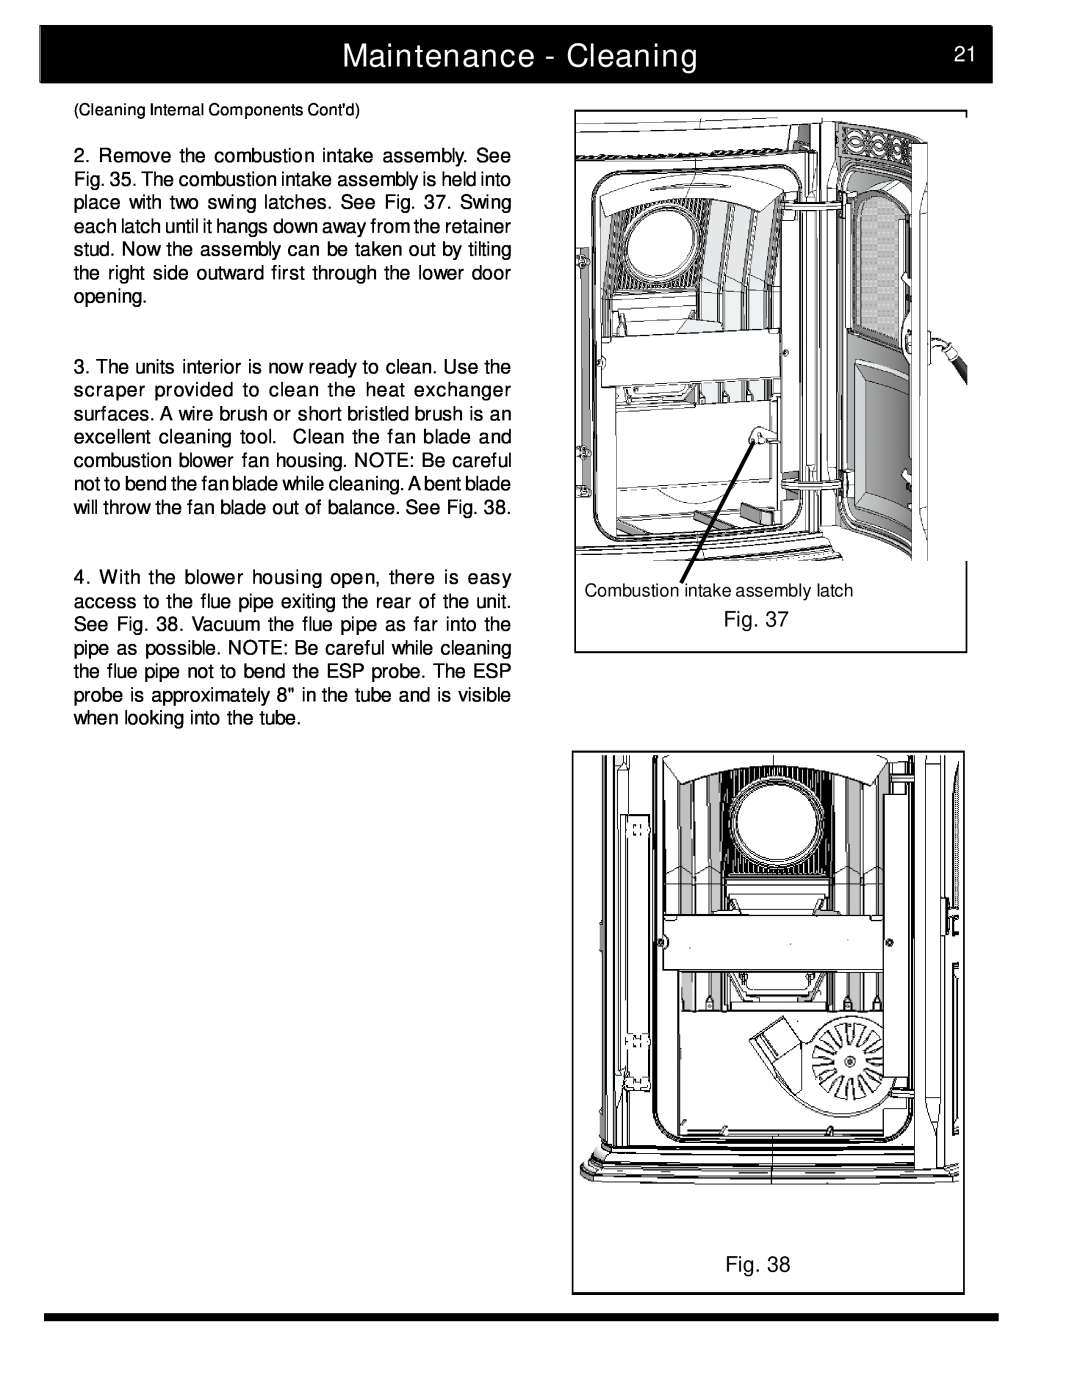 Harman Stove Company manual Maintenance - Cleaning21, Combustion intake assembly latch 